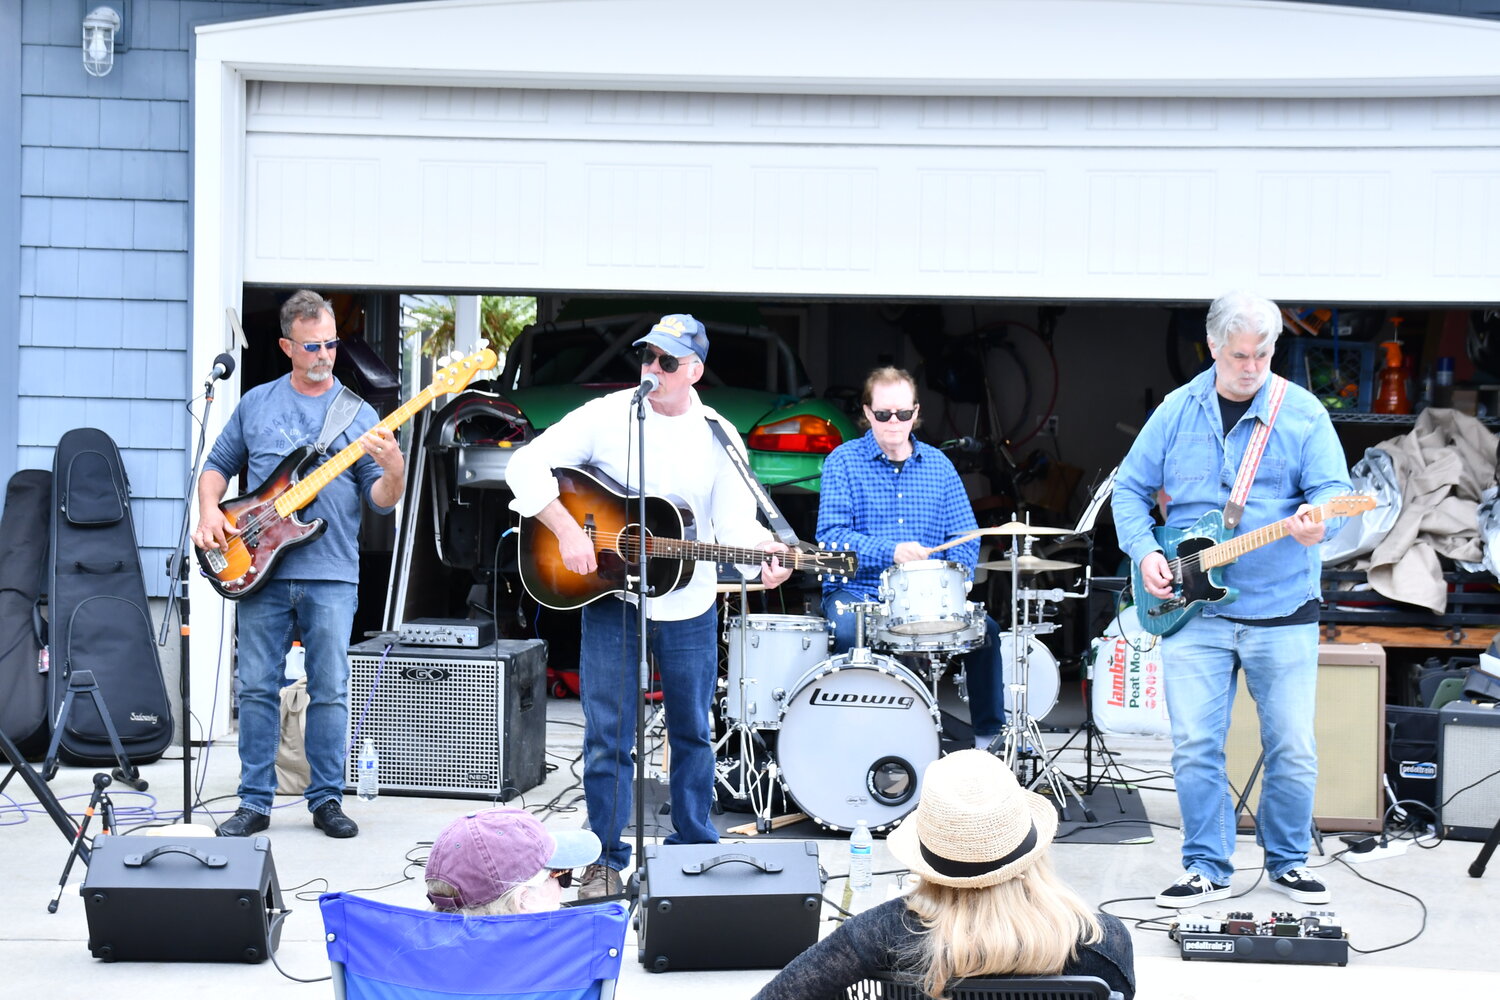 The Welldiggers played a well-attended show at 565 Washington Blvd. during Sunday’s Porch Fest.